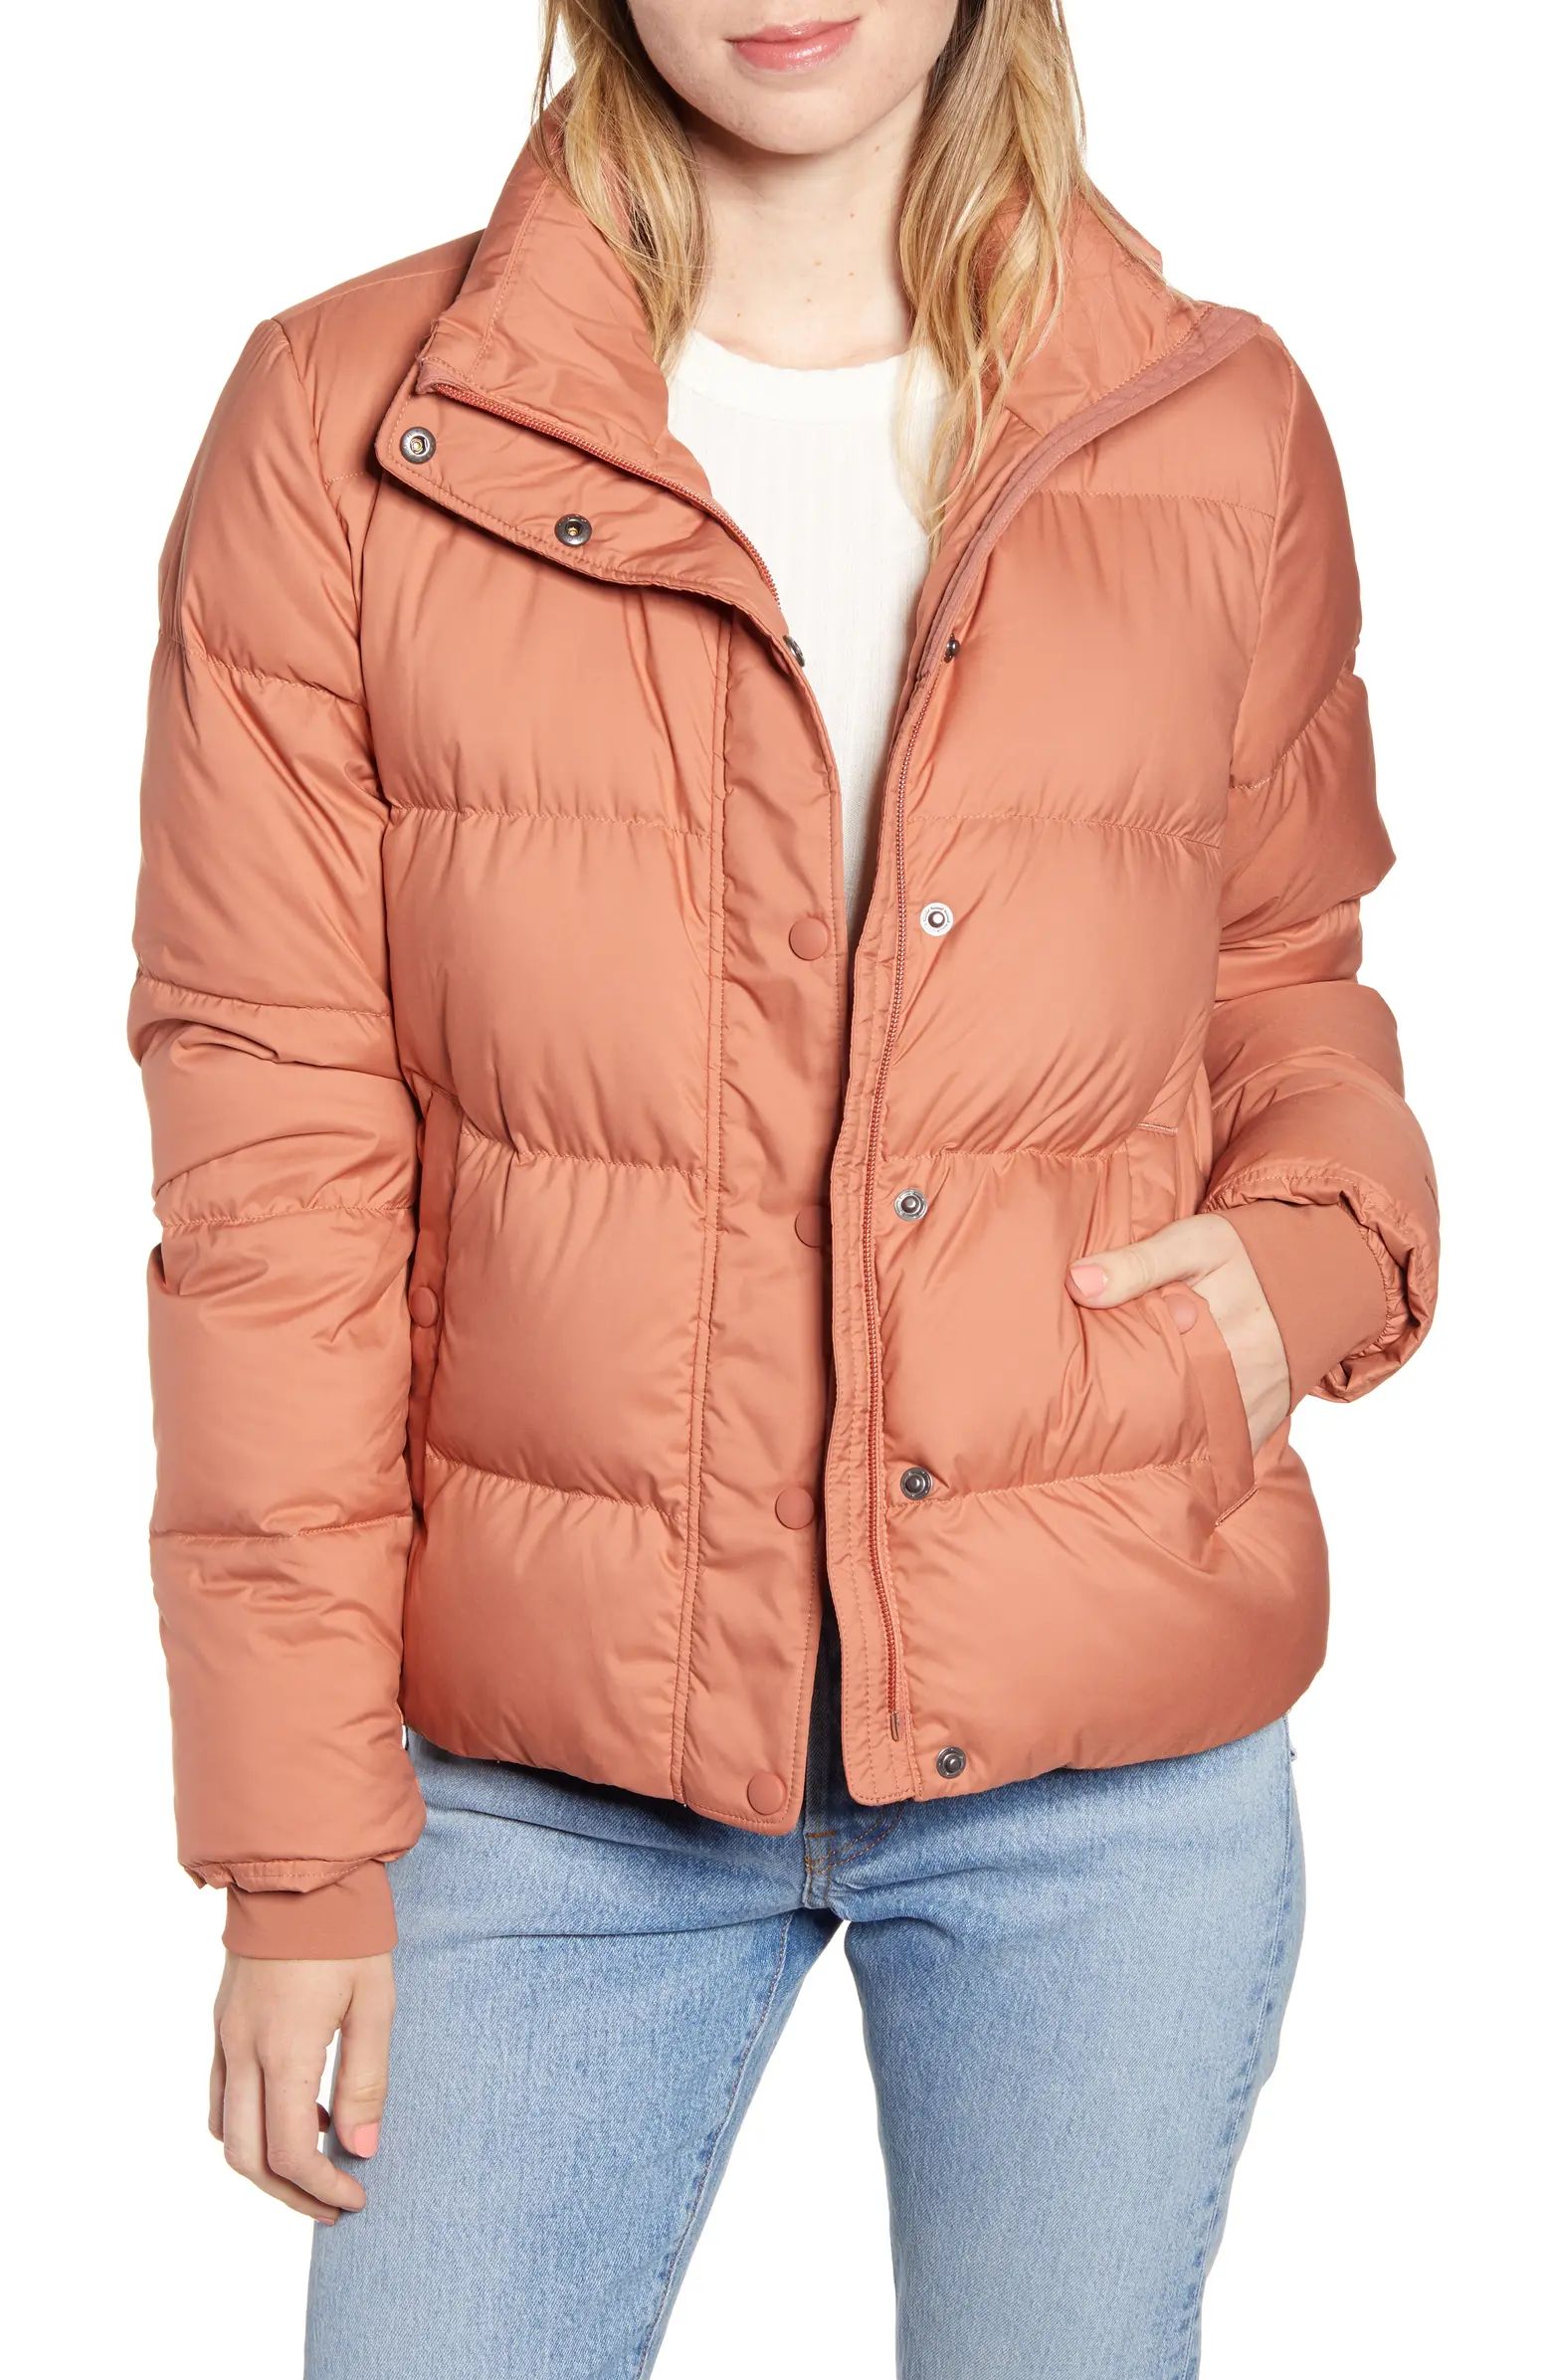 Silent Water Repellent 700-Fill Power Down Insulated Jacket | Nordstrom